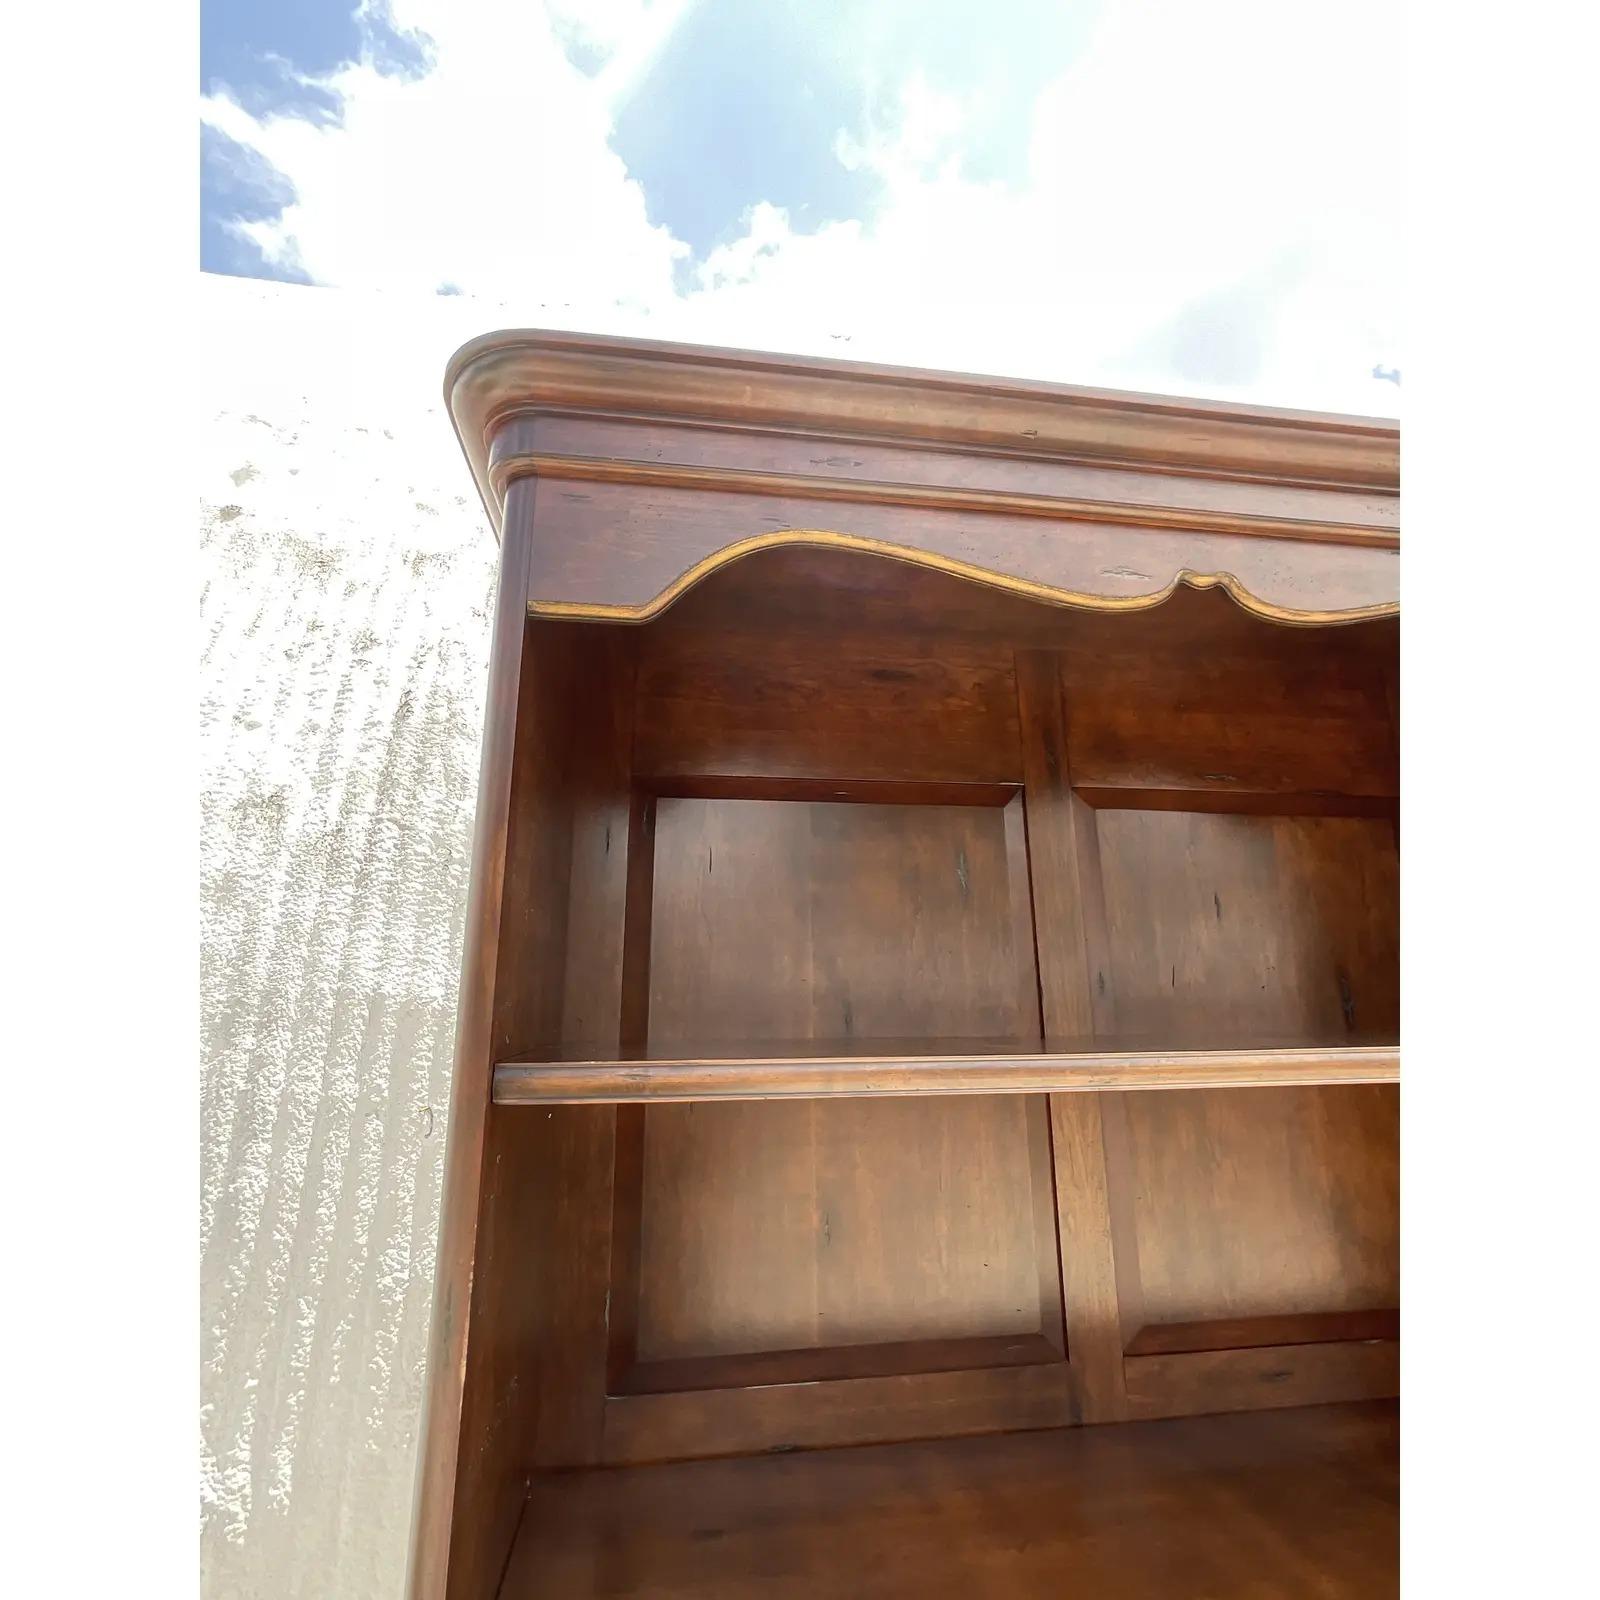 Fantastic custom built etagere. Monumental in size and drama. Beautiful Millwork design with gilt touches. Handy pull out table to extend one shelf. Perfect for a mini dry bar! Matching etagere without pullout table also available. Acquired from a